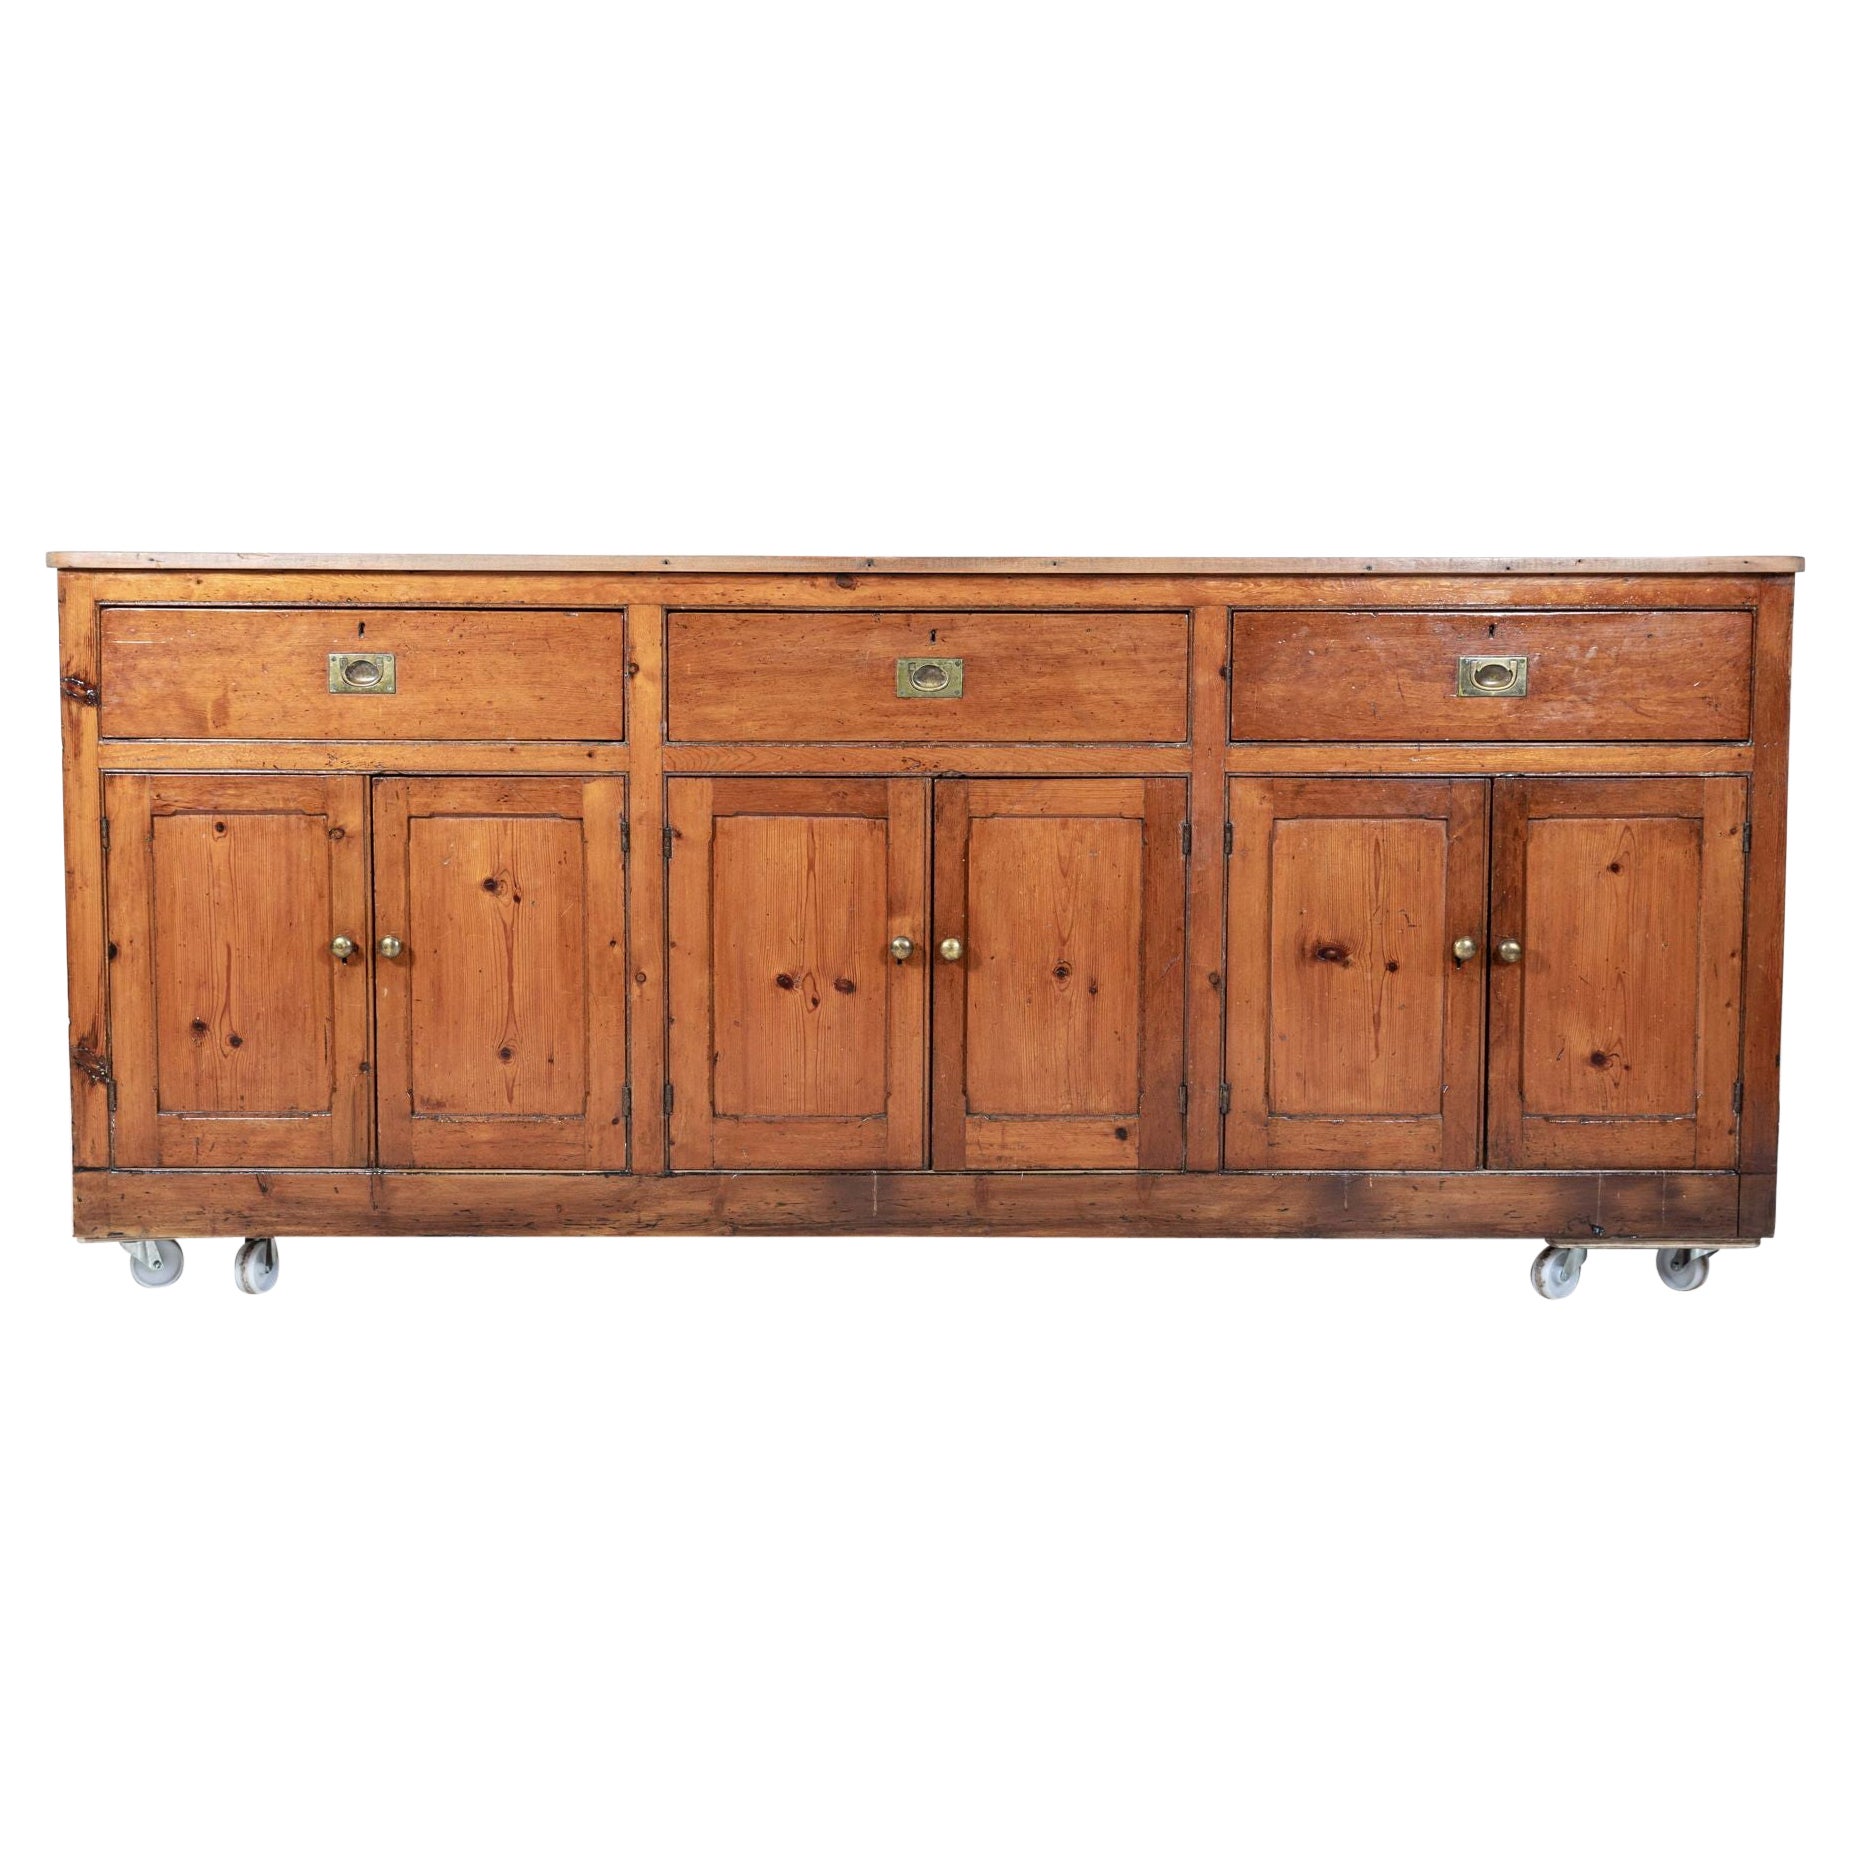 Large 19th C English Country Pine Dresser Base For Sale